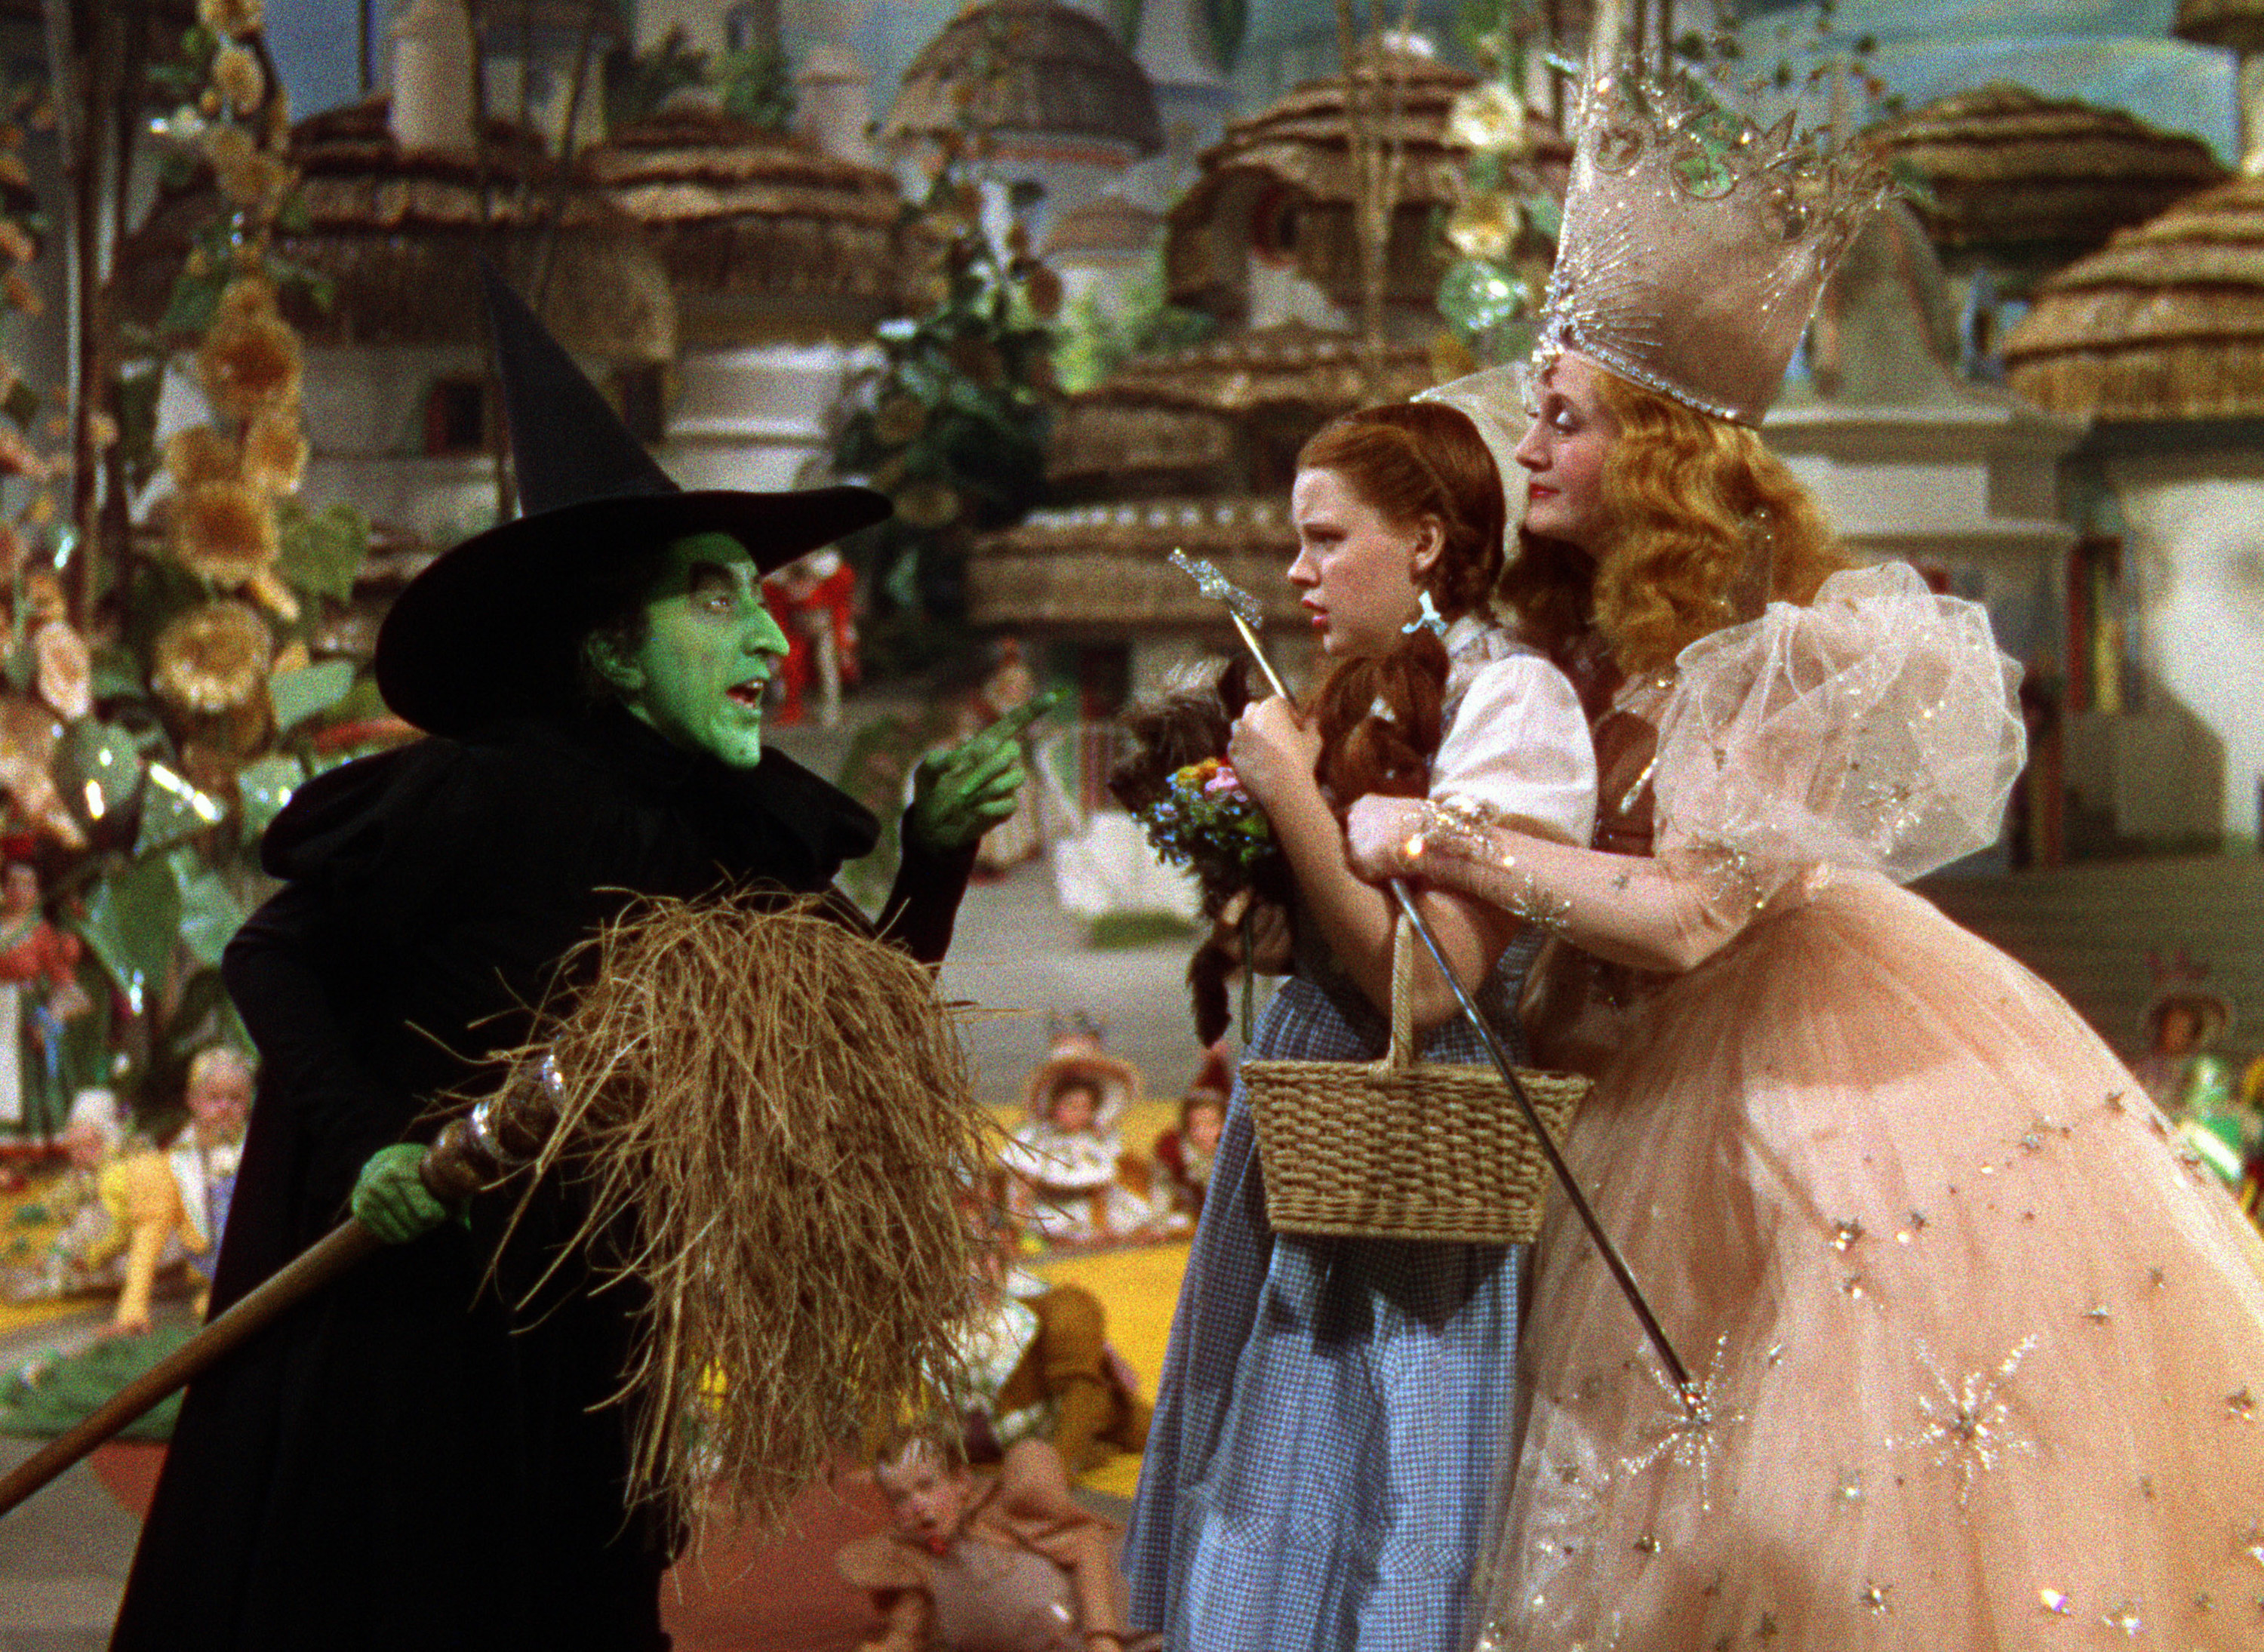 The Wicked Witch of the West threatening Dorothy as Glinda holds her